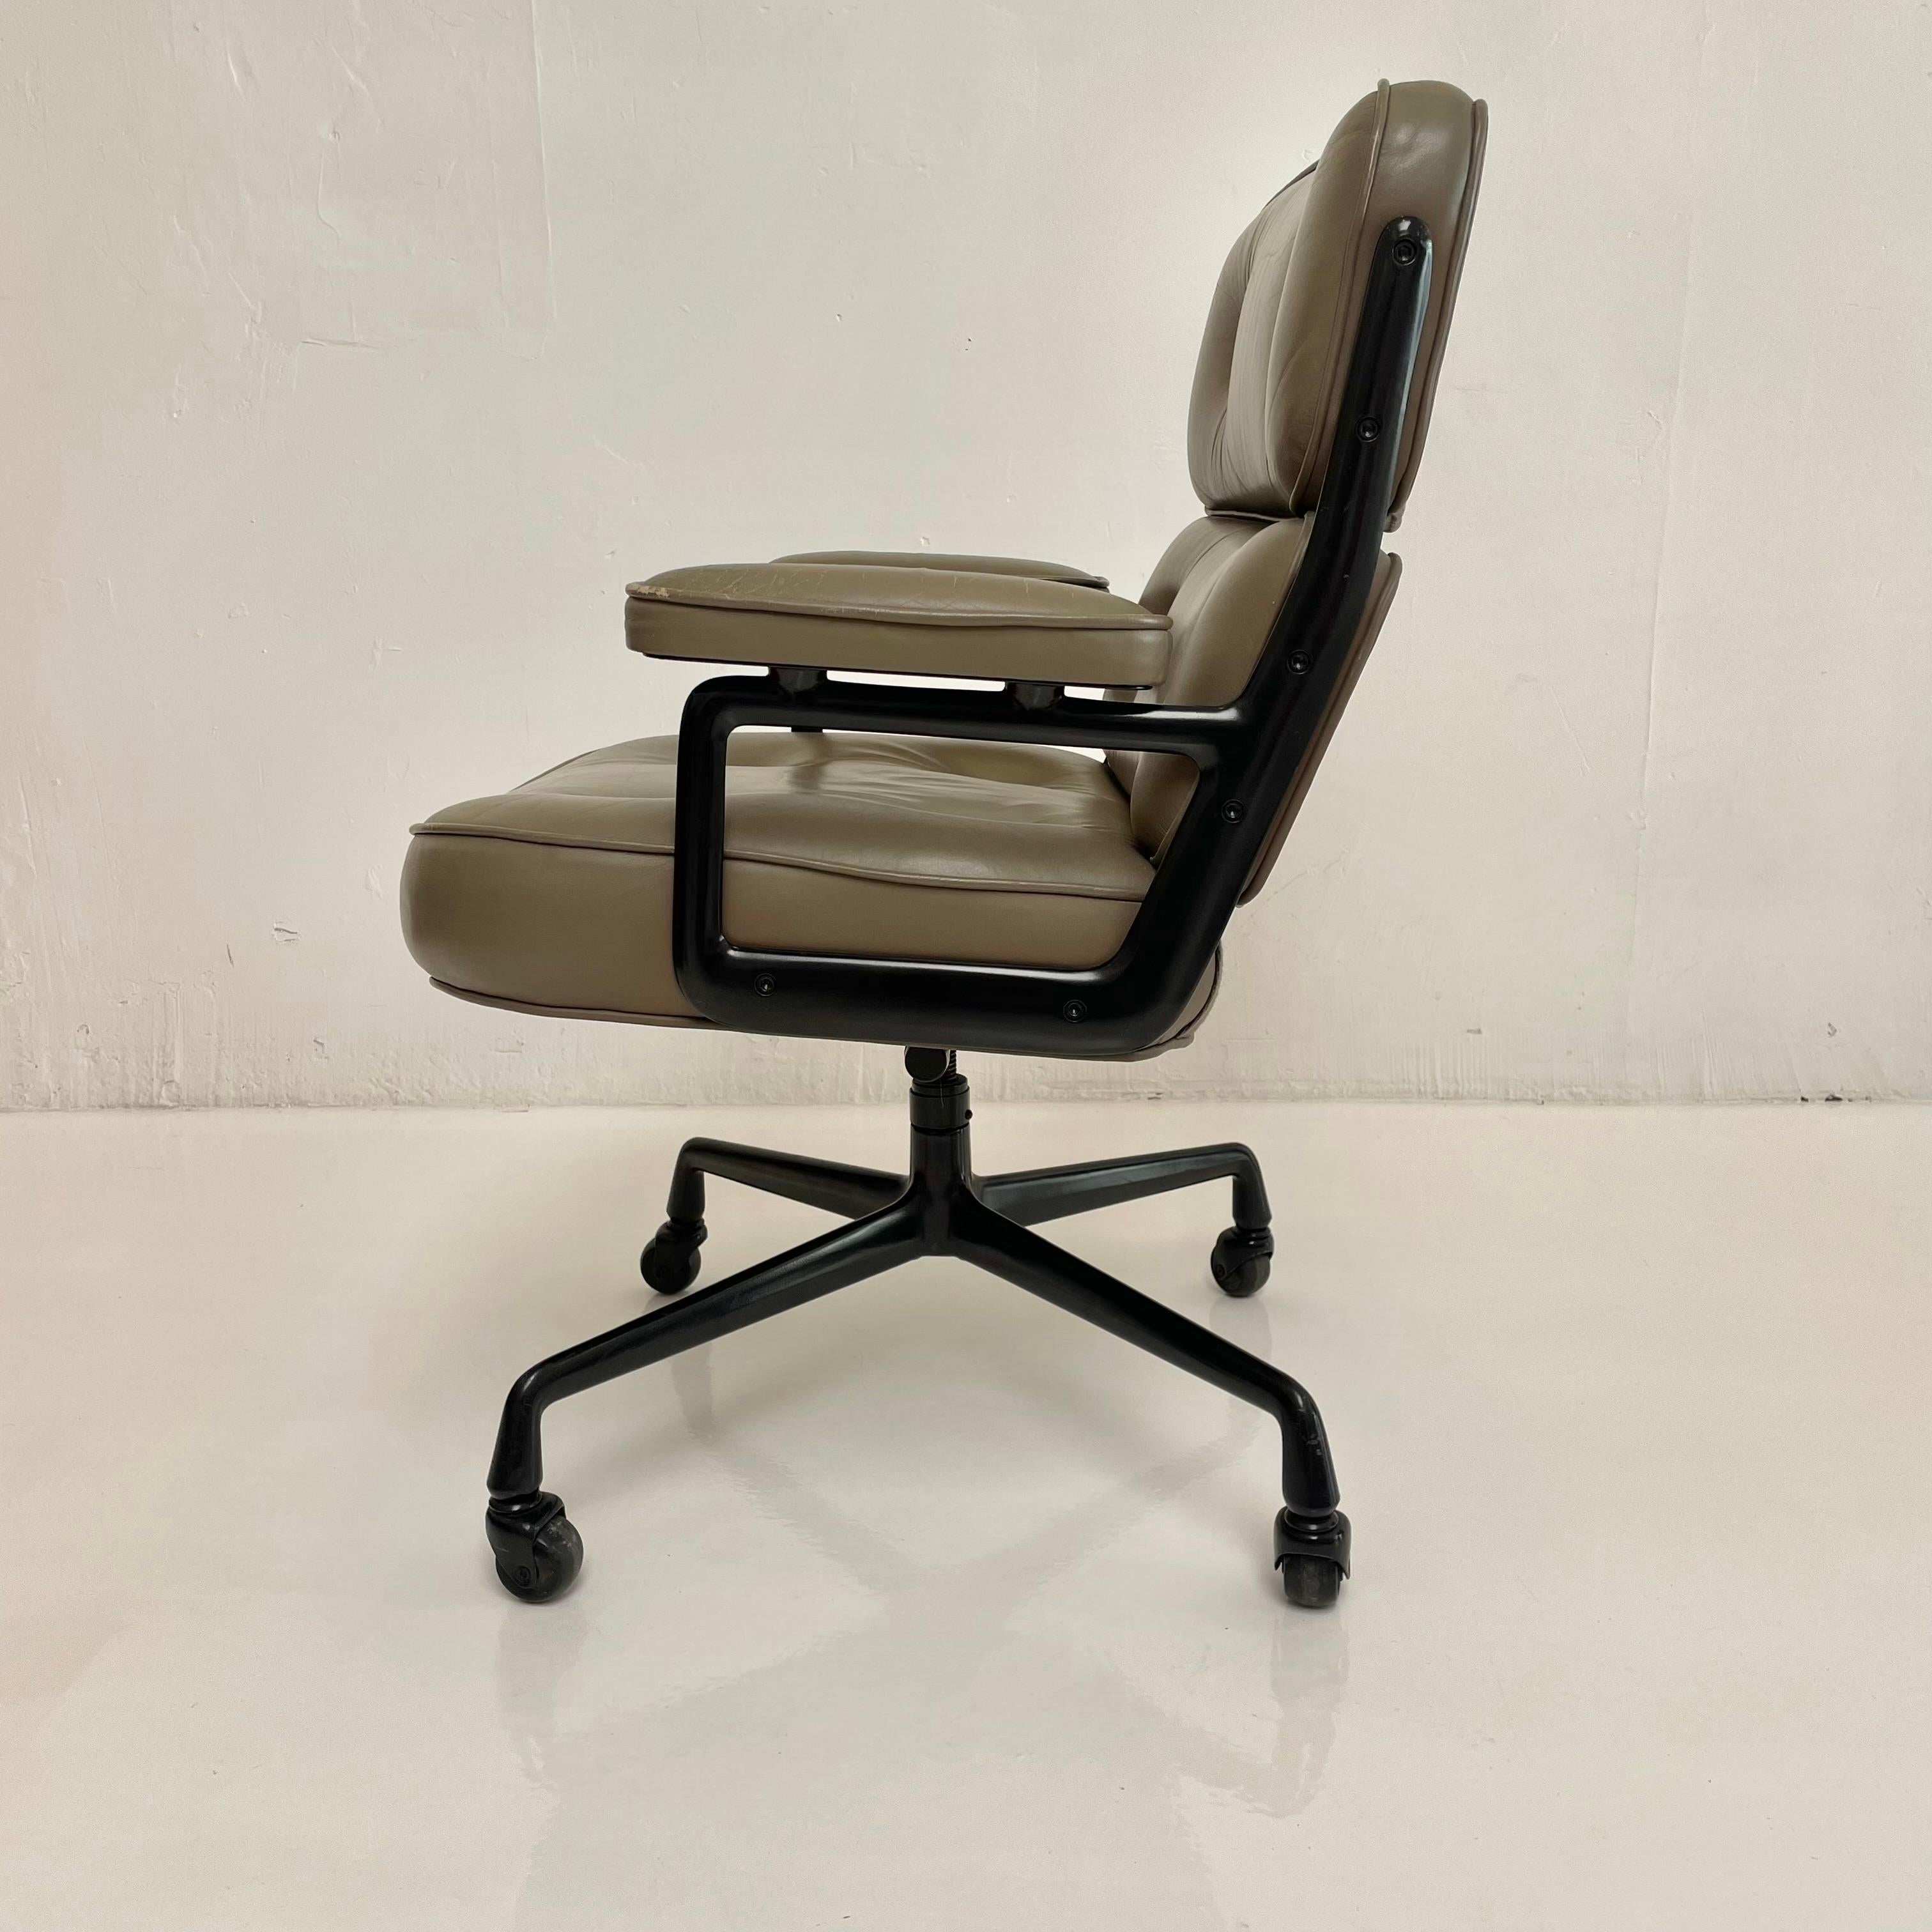 Eames Time Life Chair in Olive Leather for Herman Miller, c. 1984 USA 1